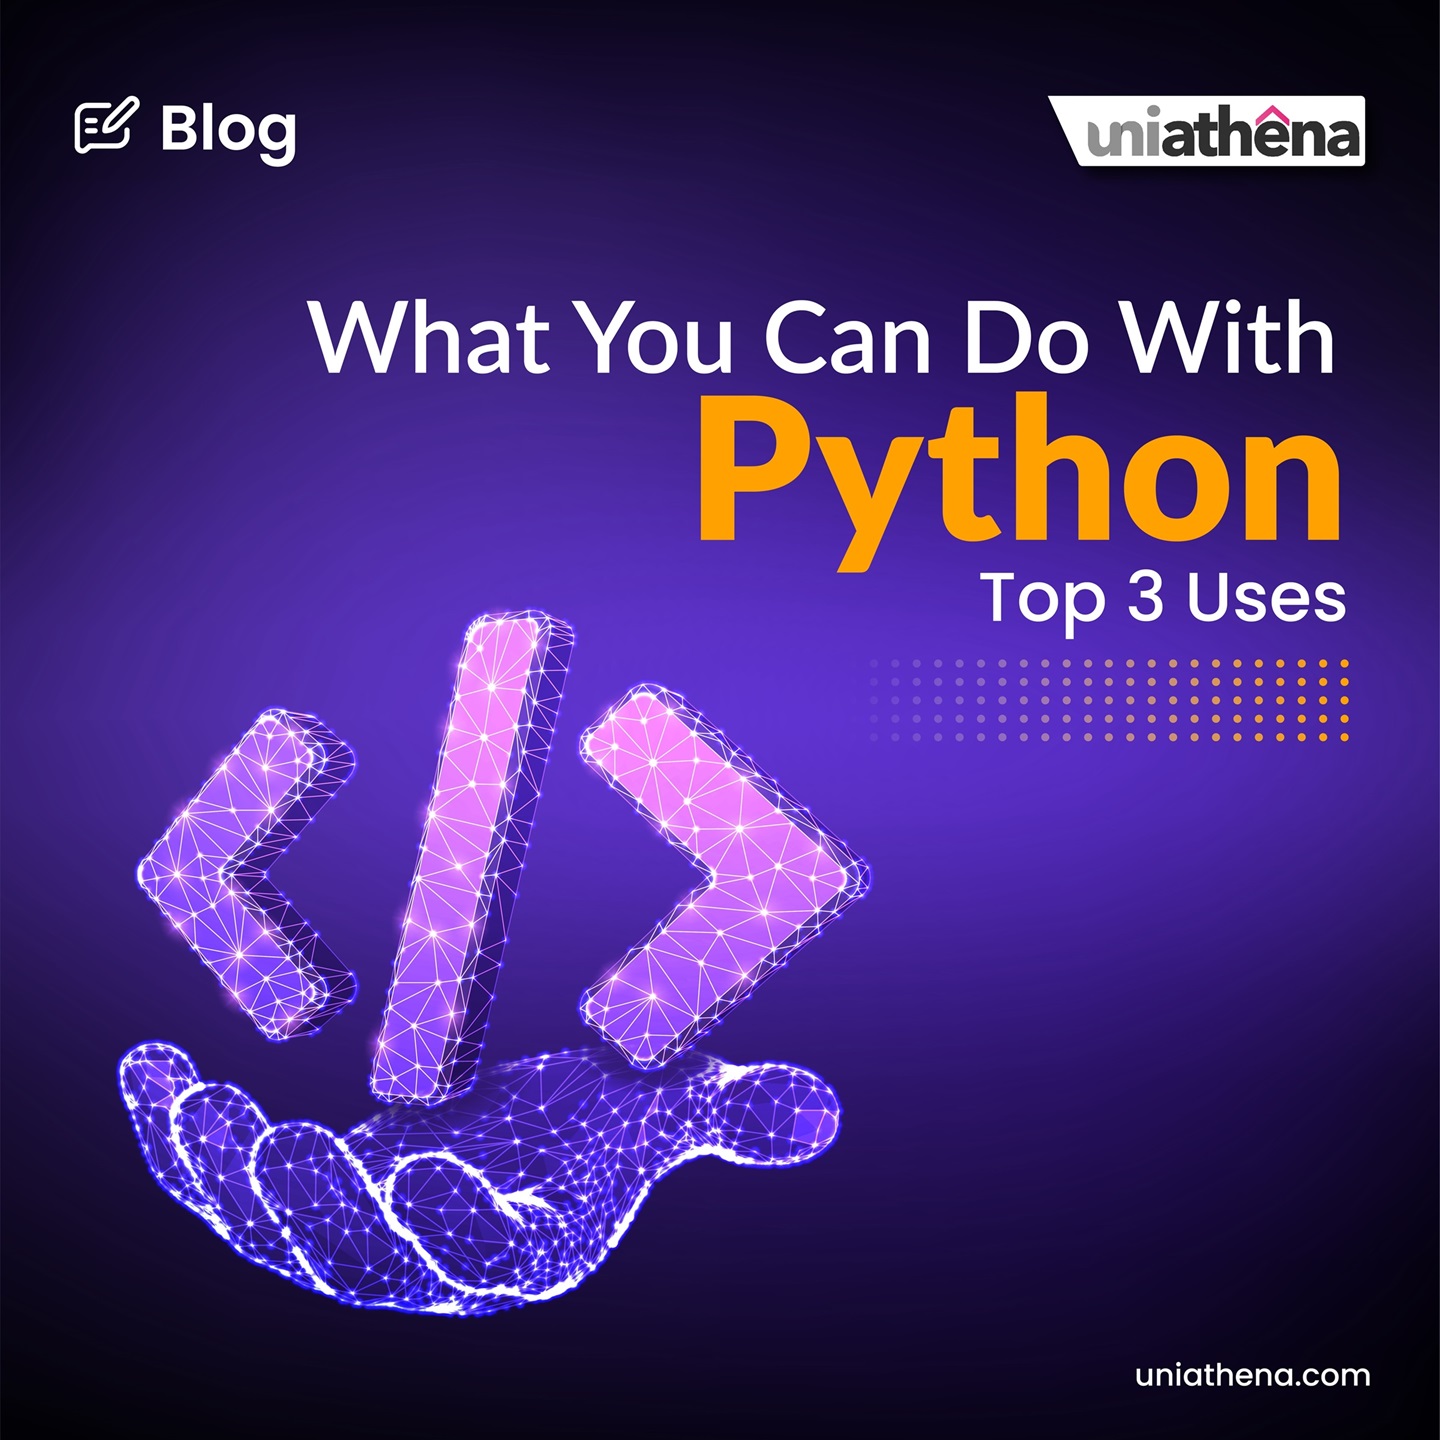 What You Can Do With Python Top 3 Uses